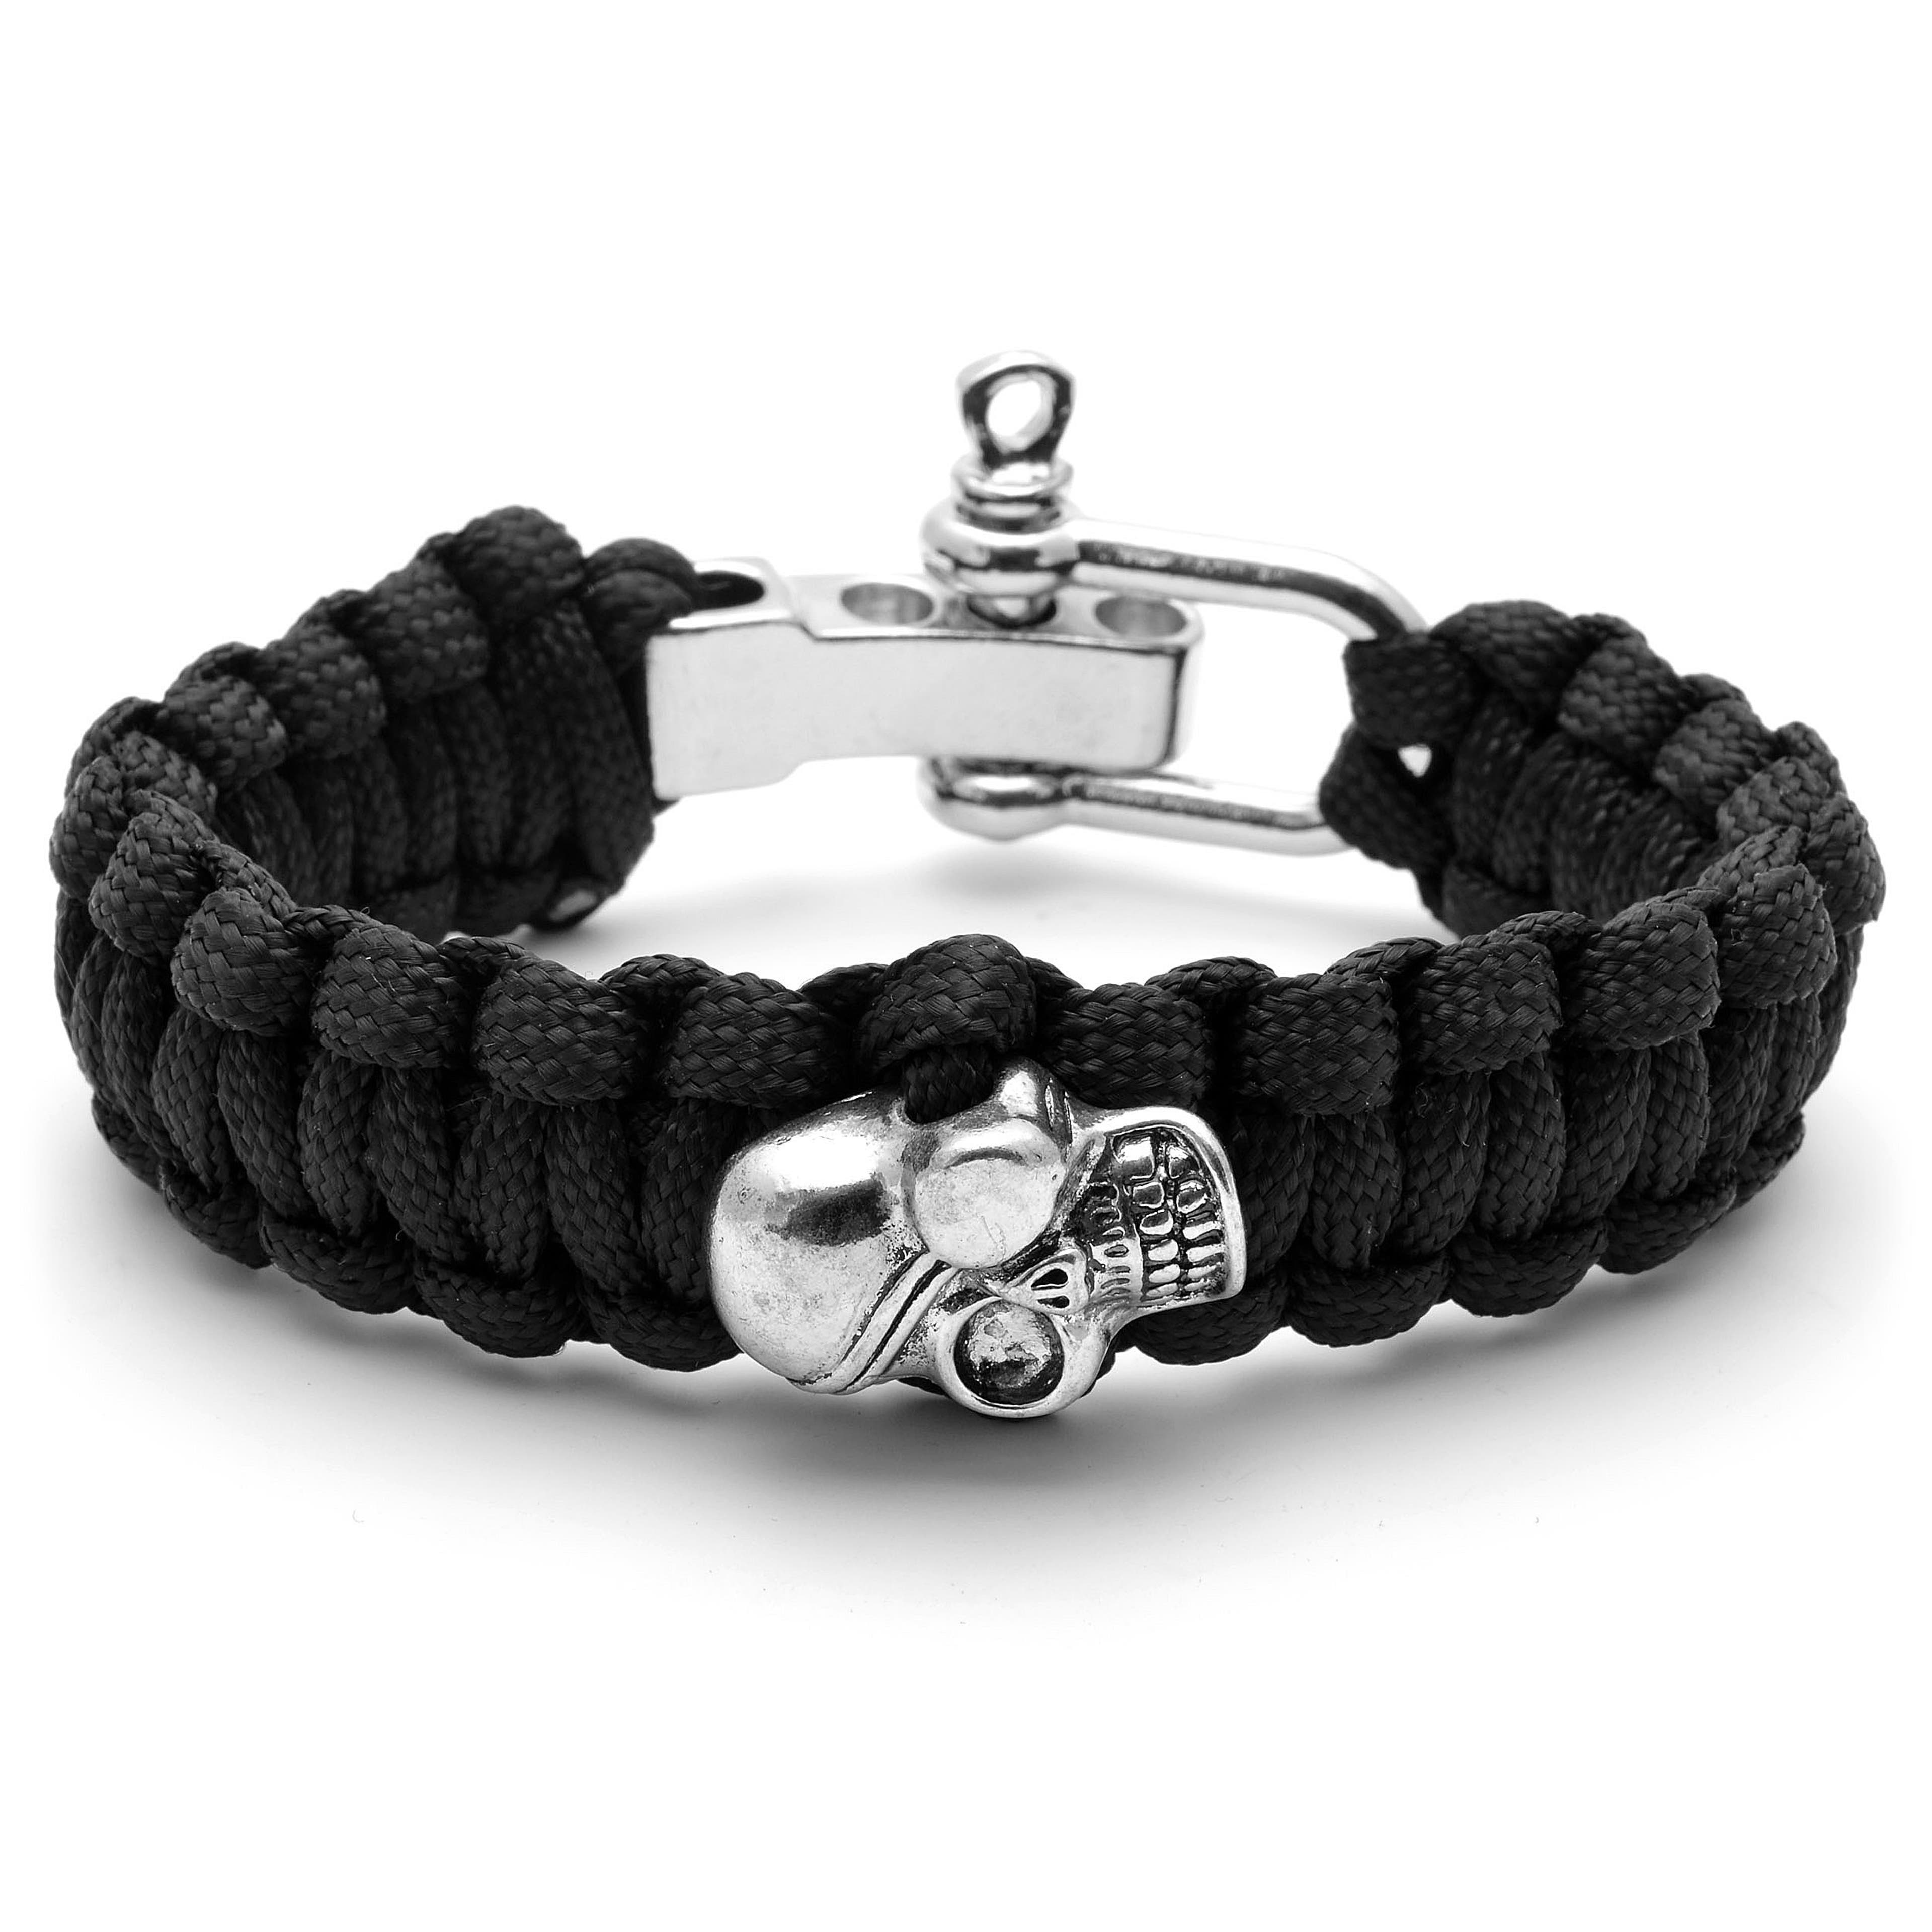 Schedel Paracord Armband